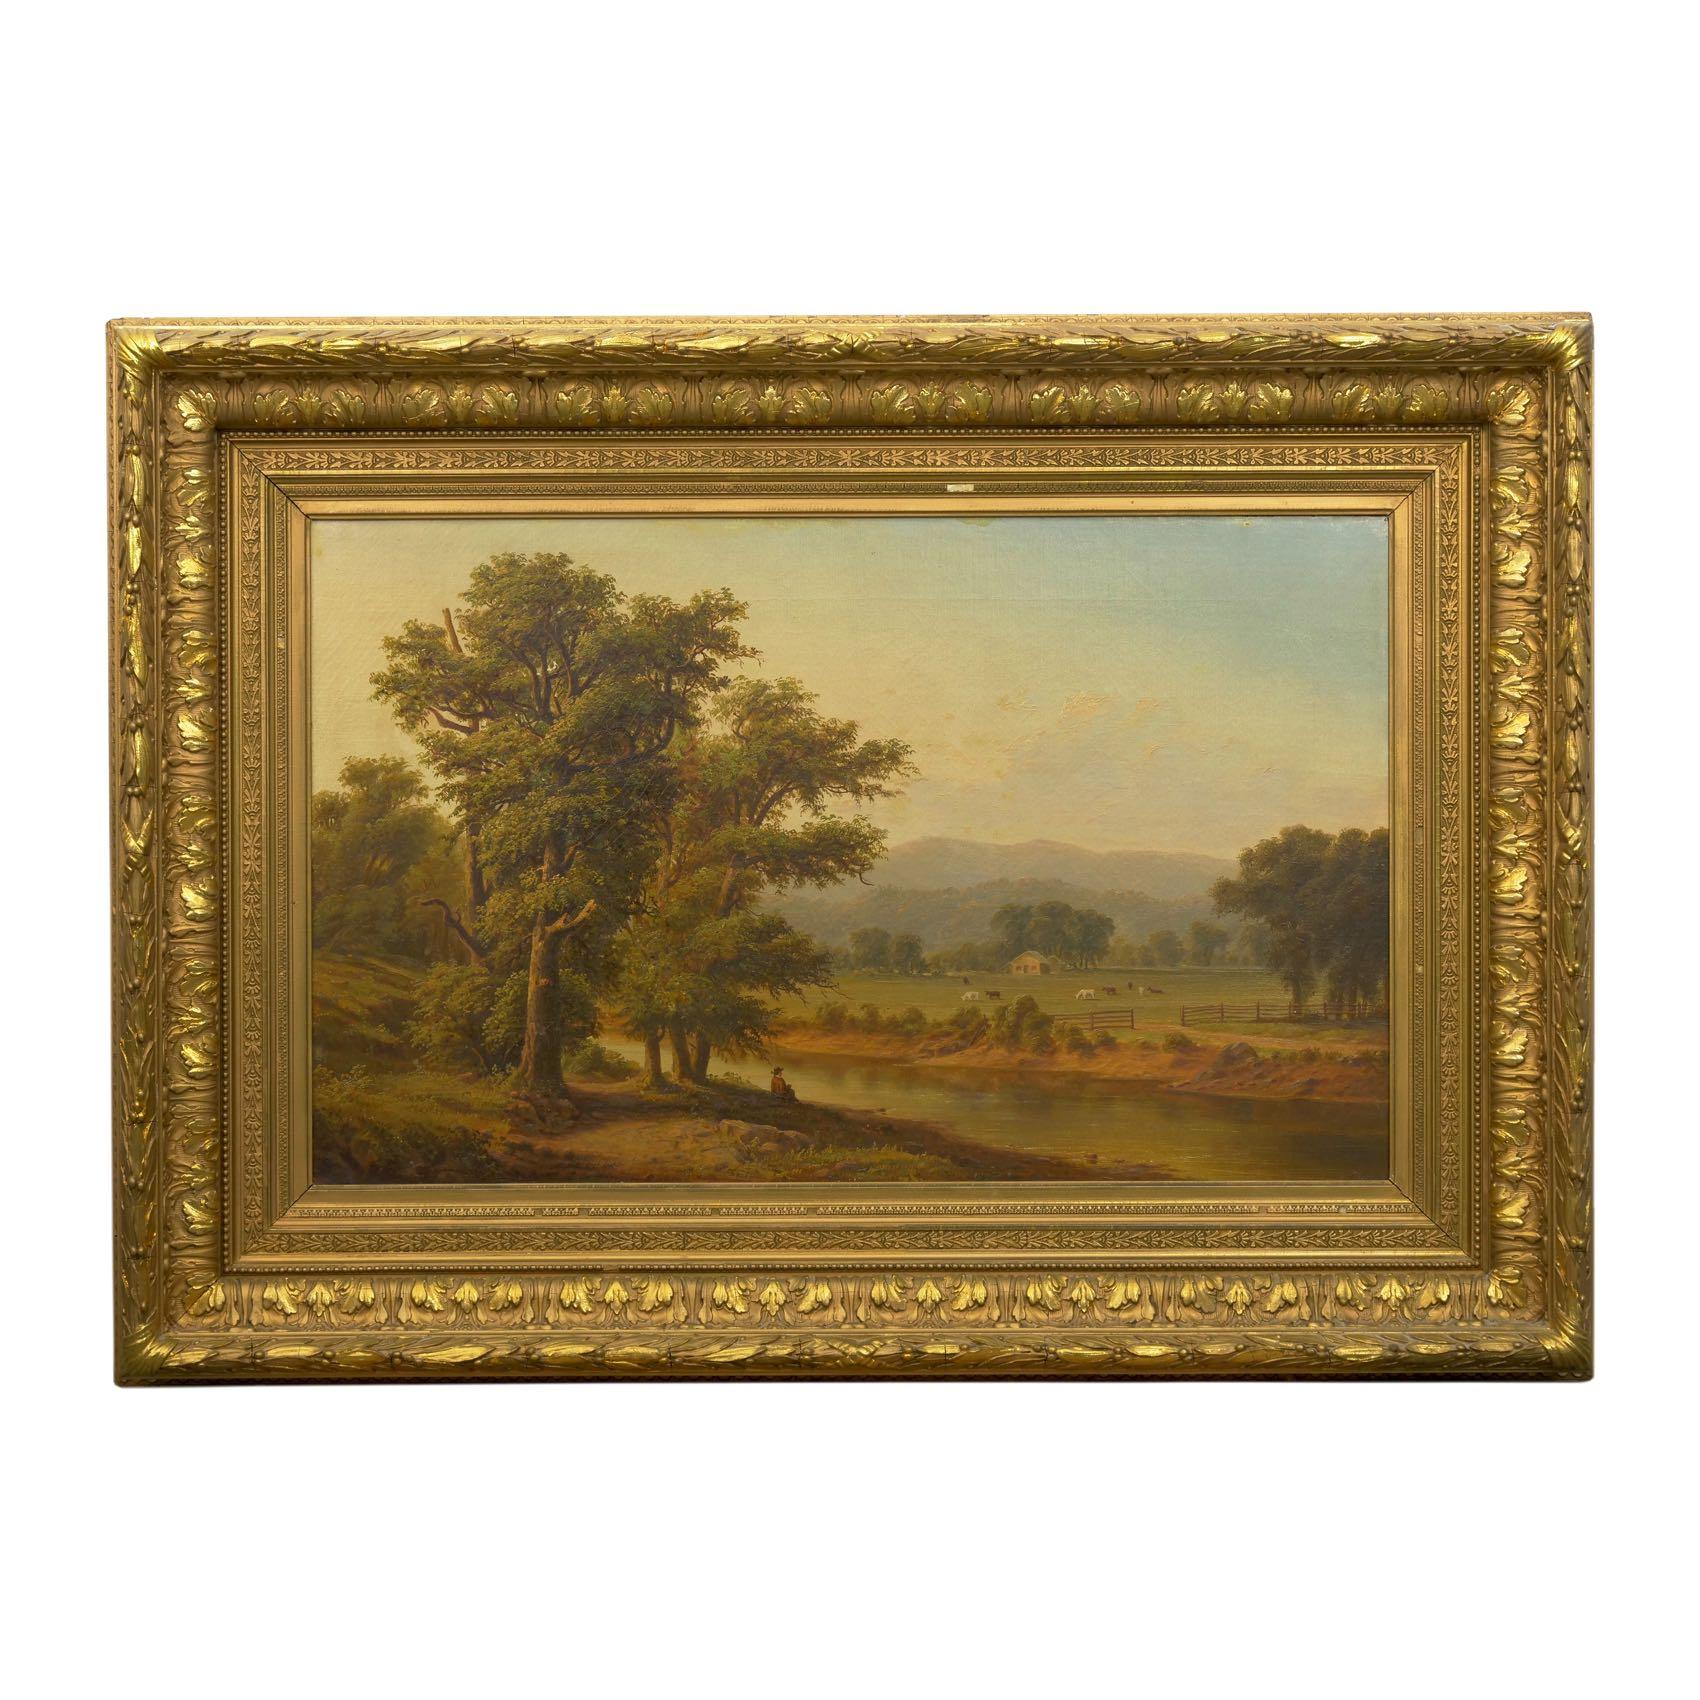 A finely painted scene in oil on canvas executed in the manner of the Hudson River Valley school, this vivid landscape depicts a sweeping view of the countryside. The scene is handled expertly with crisp brush strokes bringing to life the complex